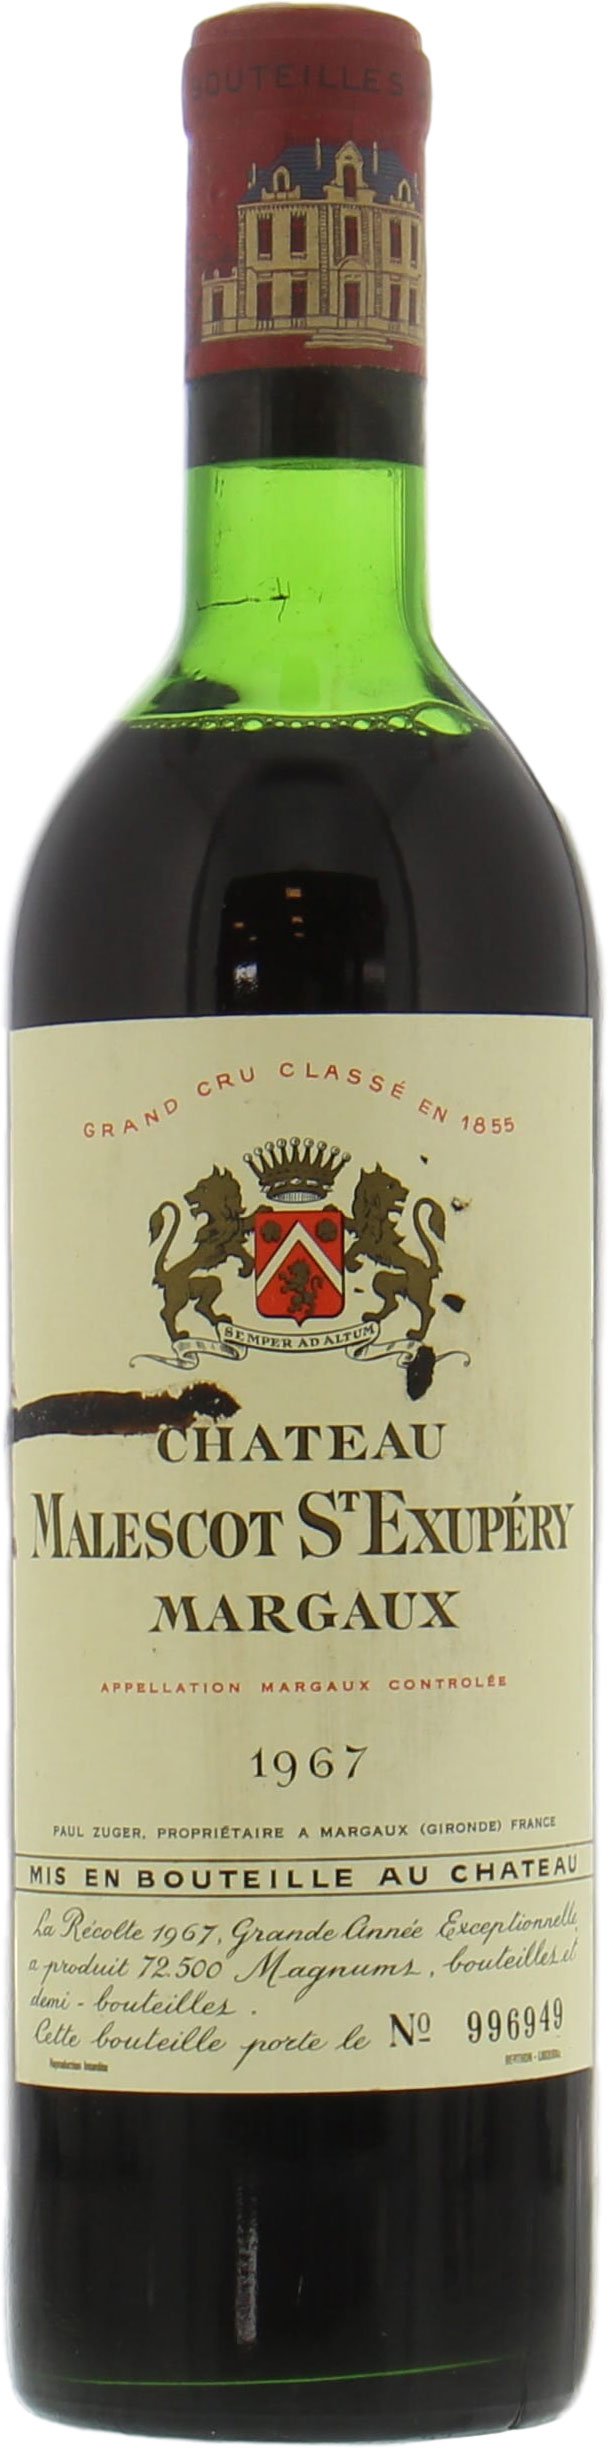 Chateau Malescot-St-Exupery - Chateau Malescot-St-Exupery 1967